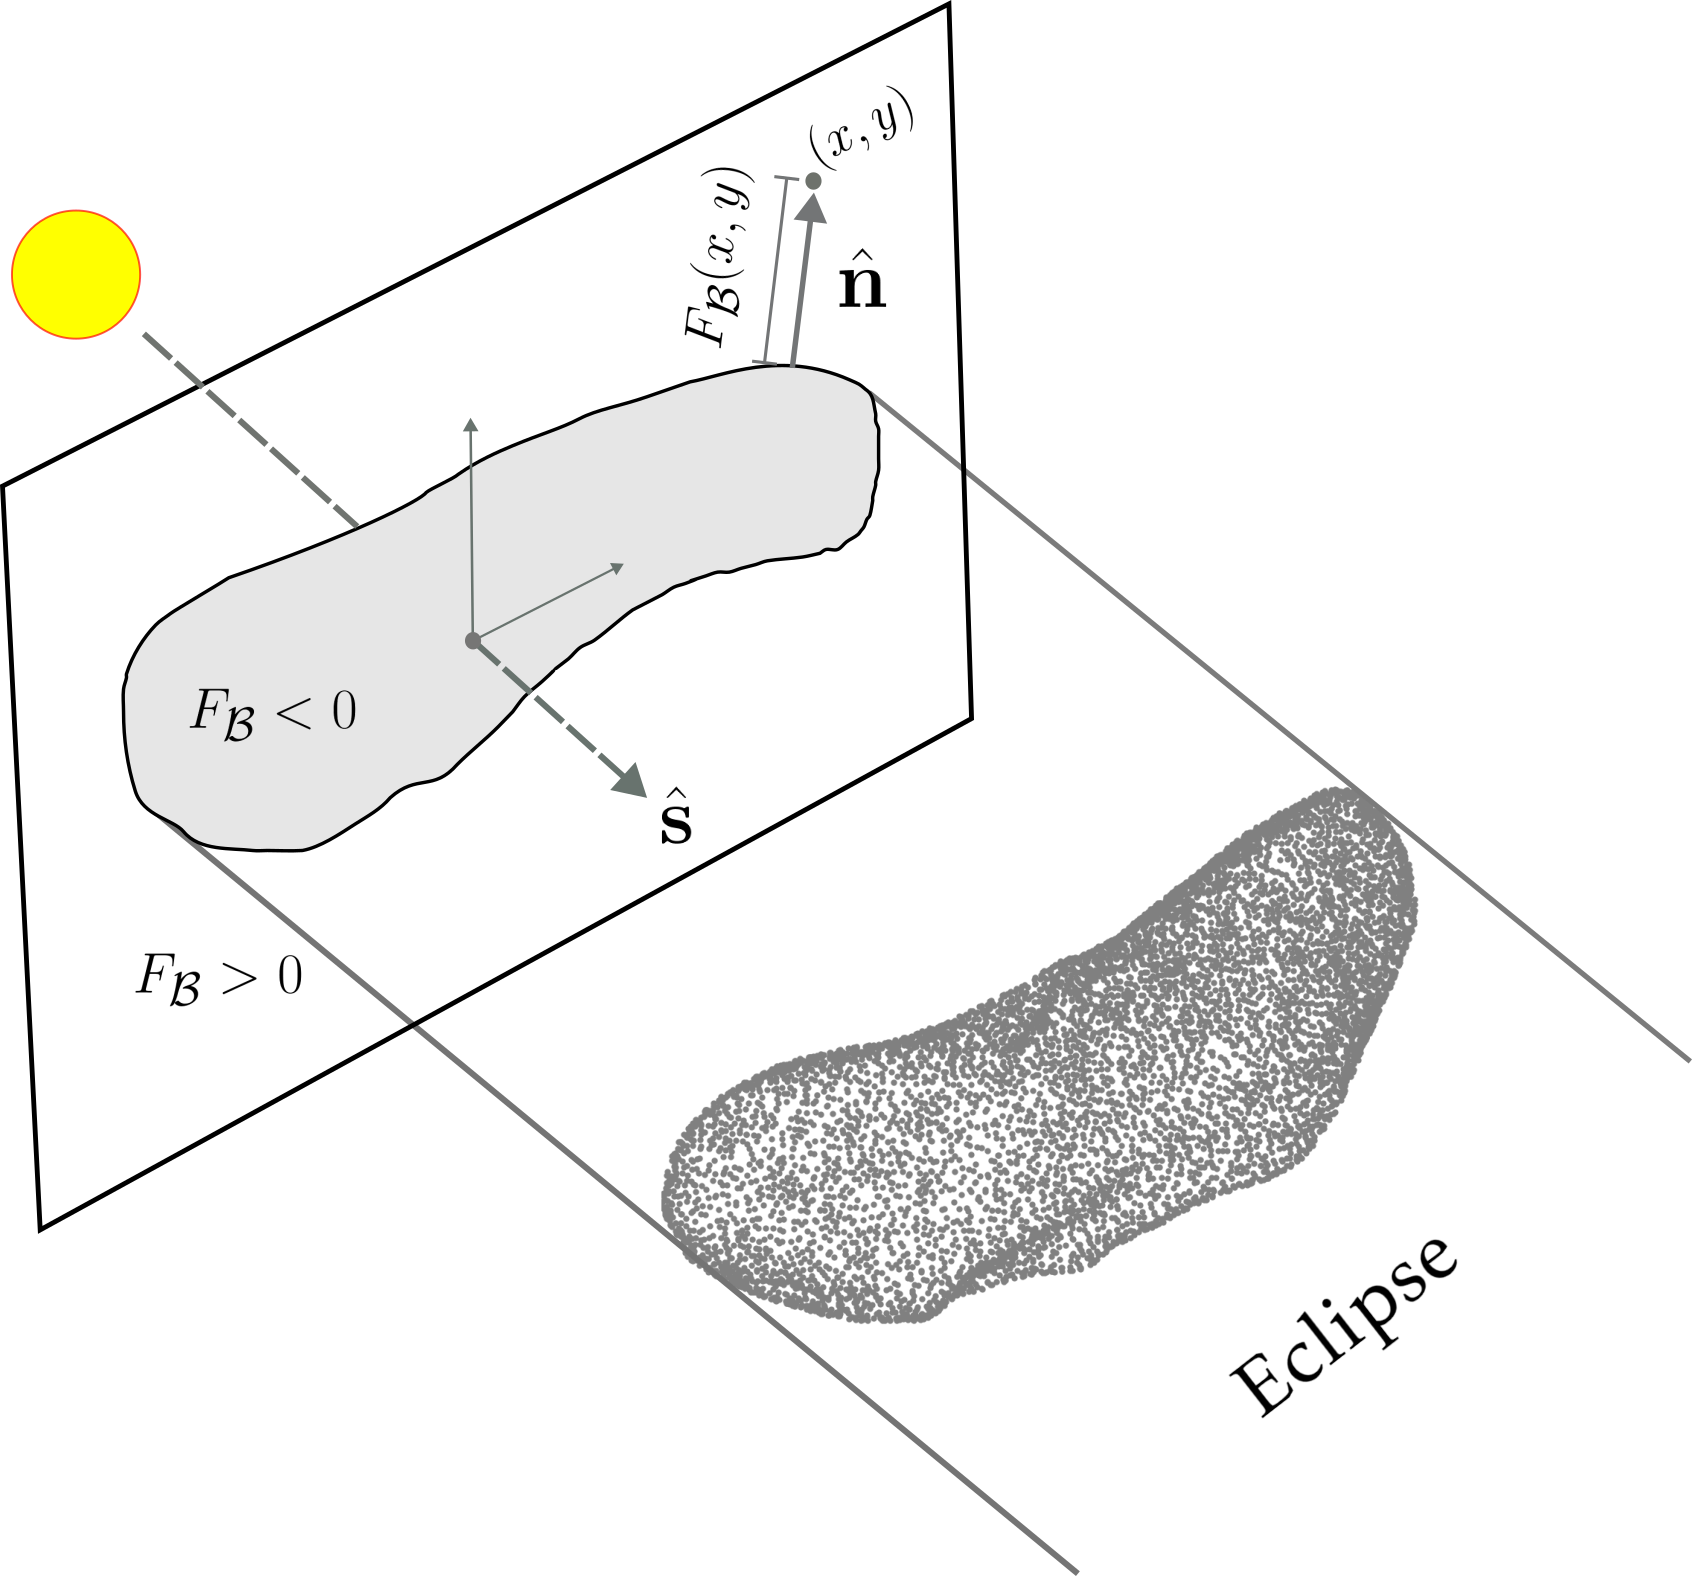 Differentiable Description of Irregular Eclipse Conditions